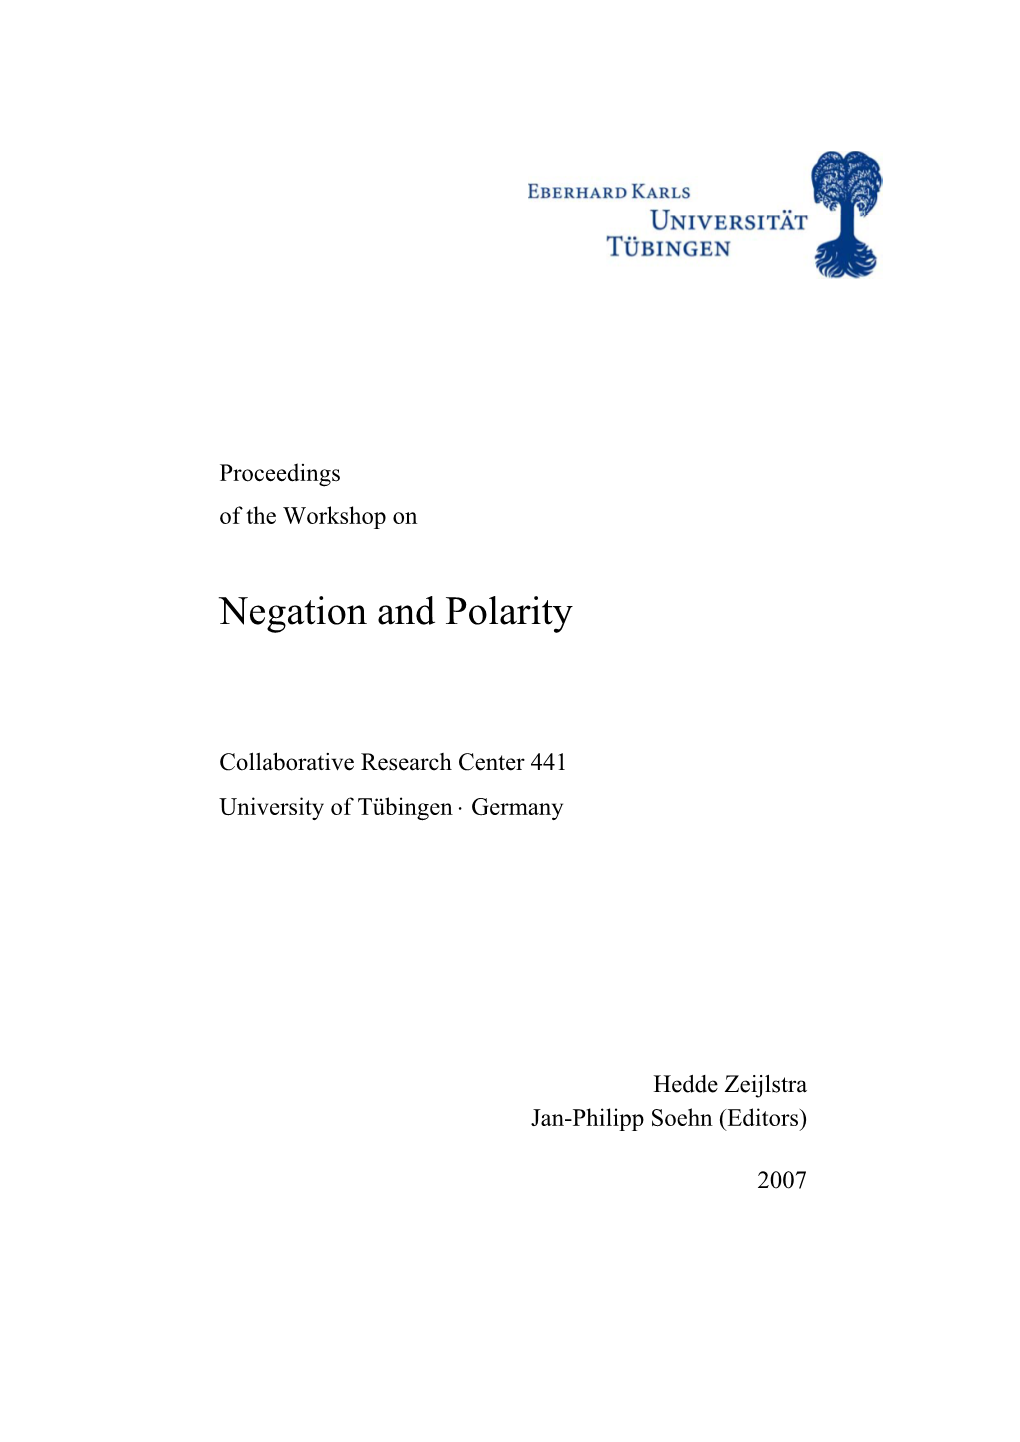 Proceedings of the Workshop on Negation and Polarity